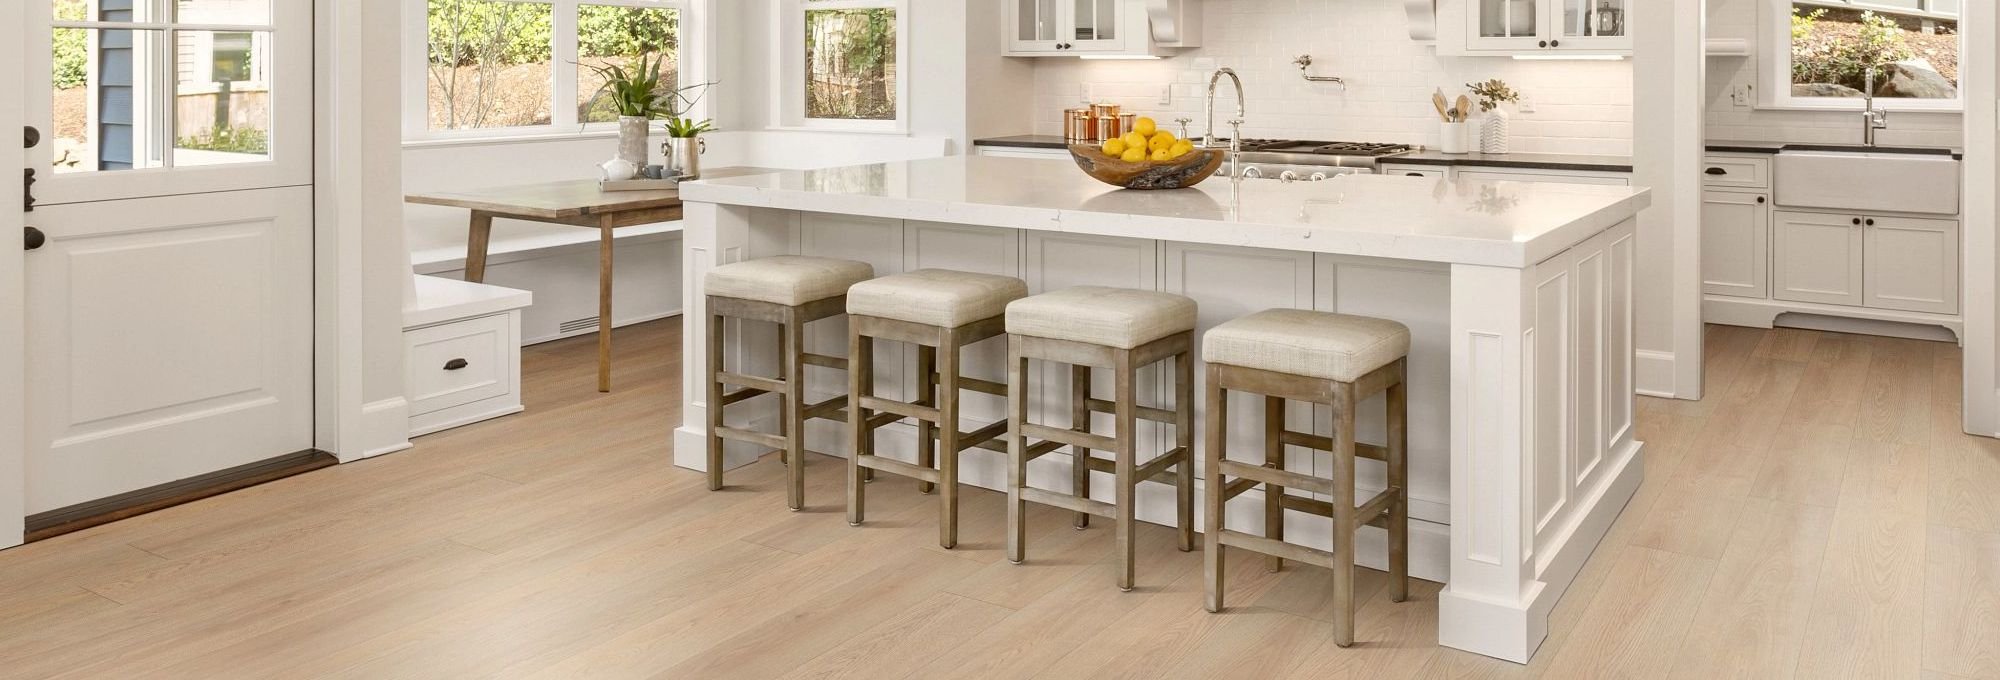 Kitchen with wood-look luxury vinyl flooring from Brennan's Carpet in Hailey, ID